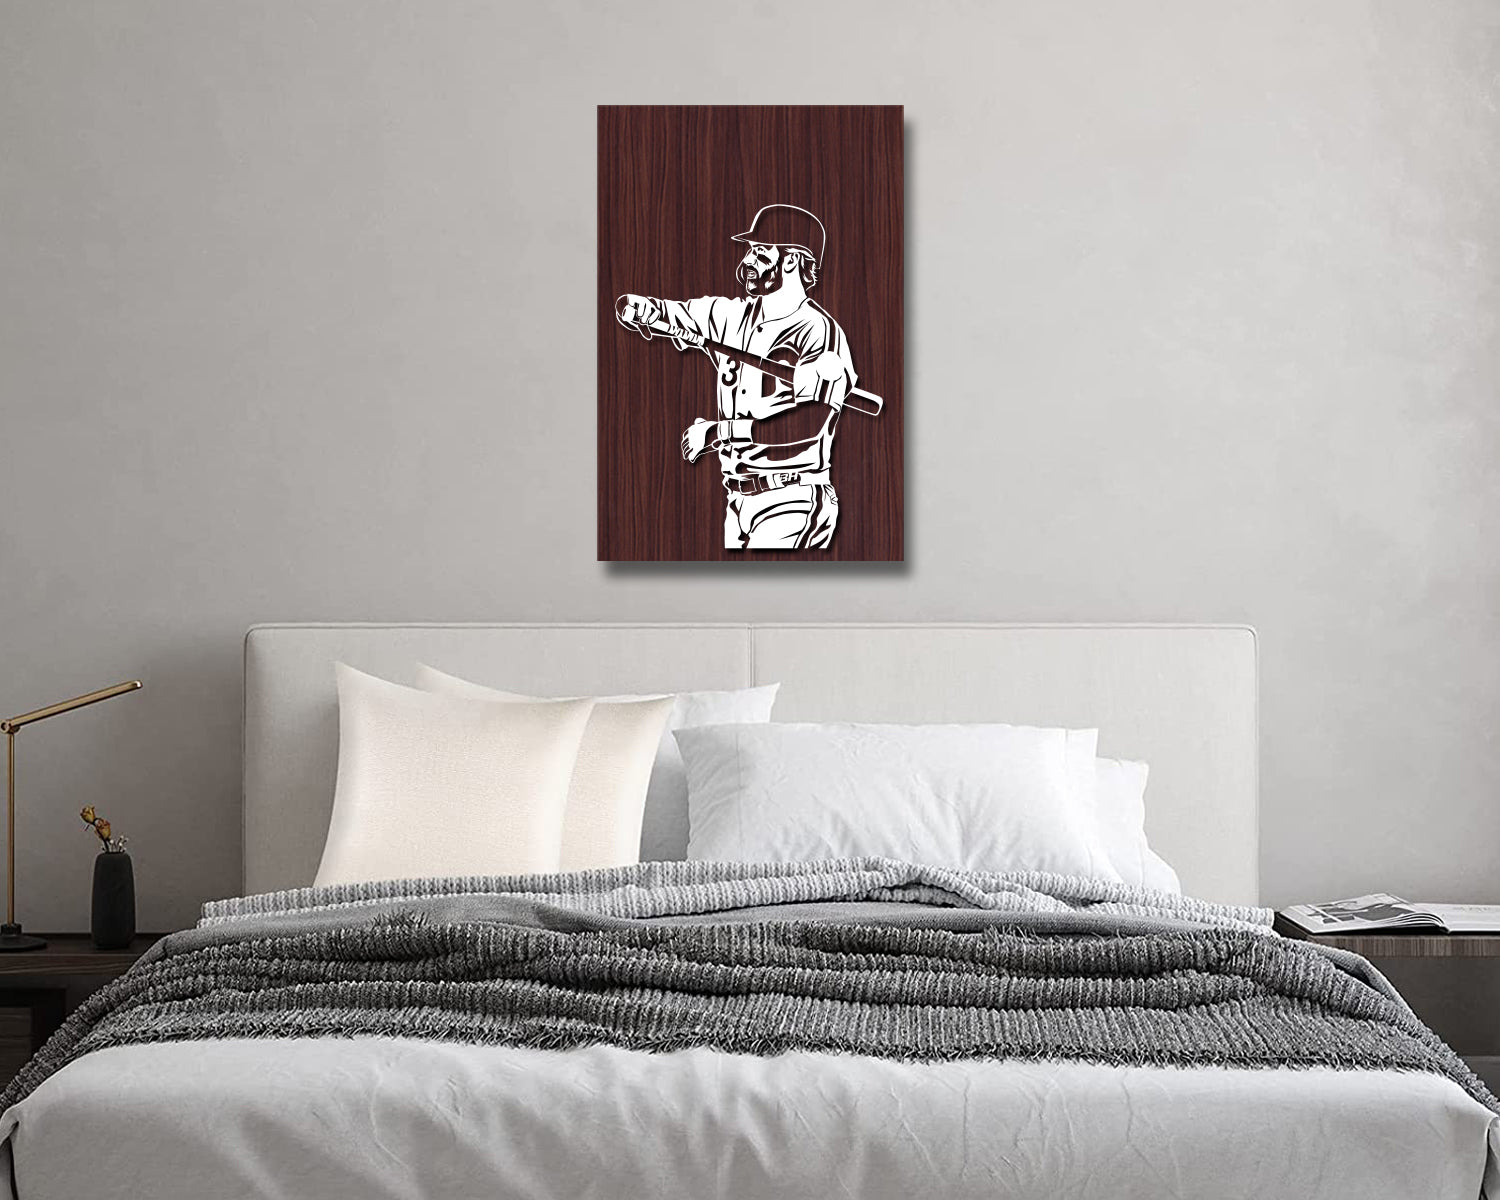 Bryce Harper LED Wooden Decal 